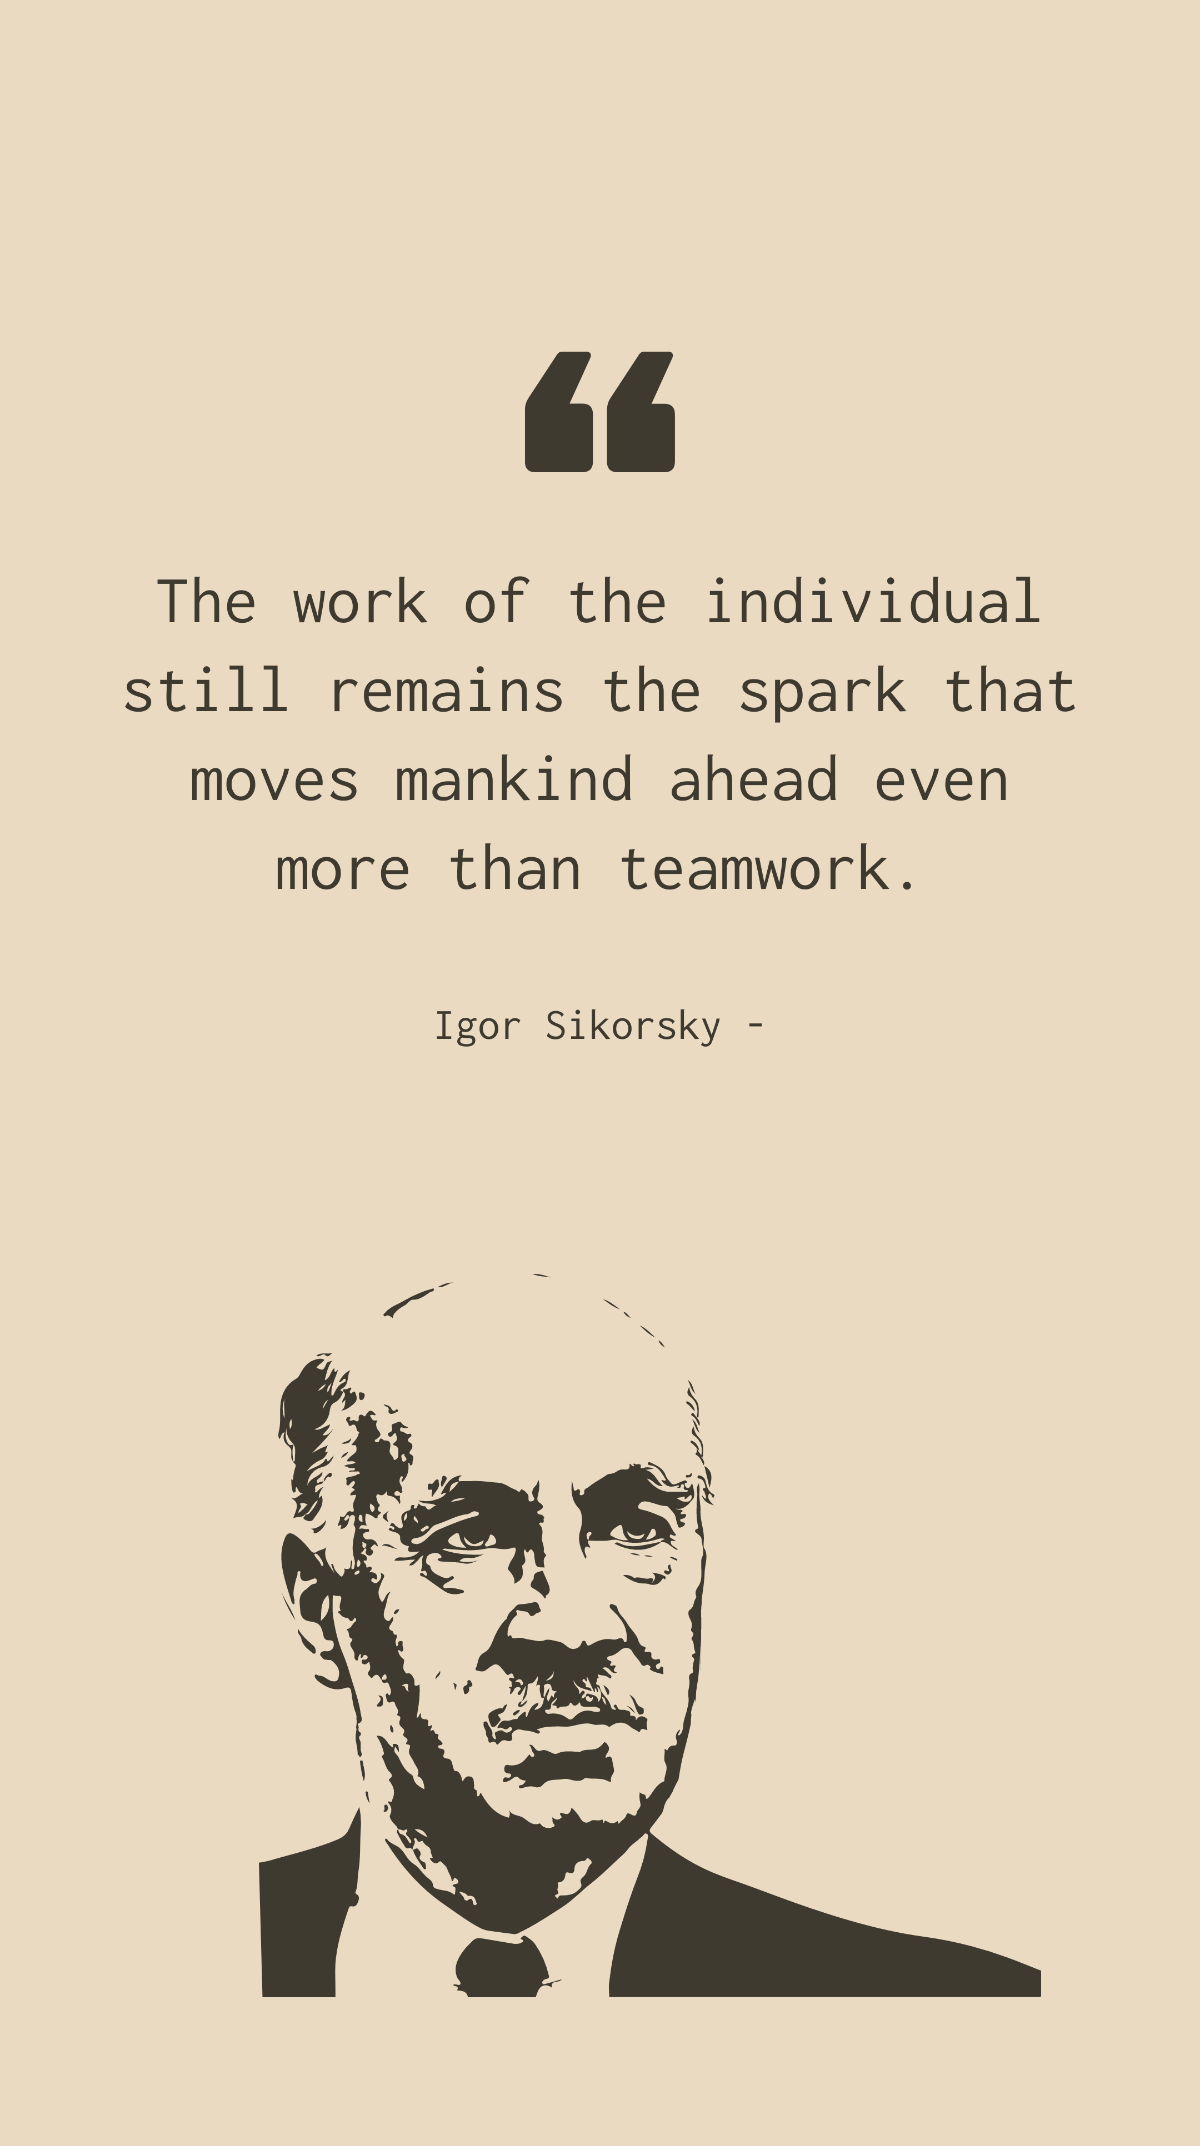 Free Igor Sikorsky - The work of the individual still remains the spark that moves mankind ahead even more than teamwork. Template